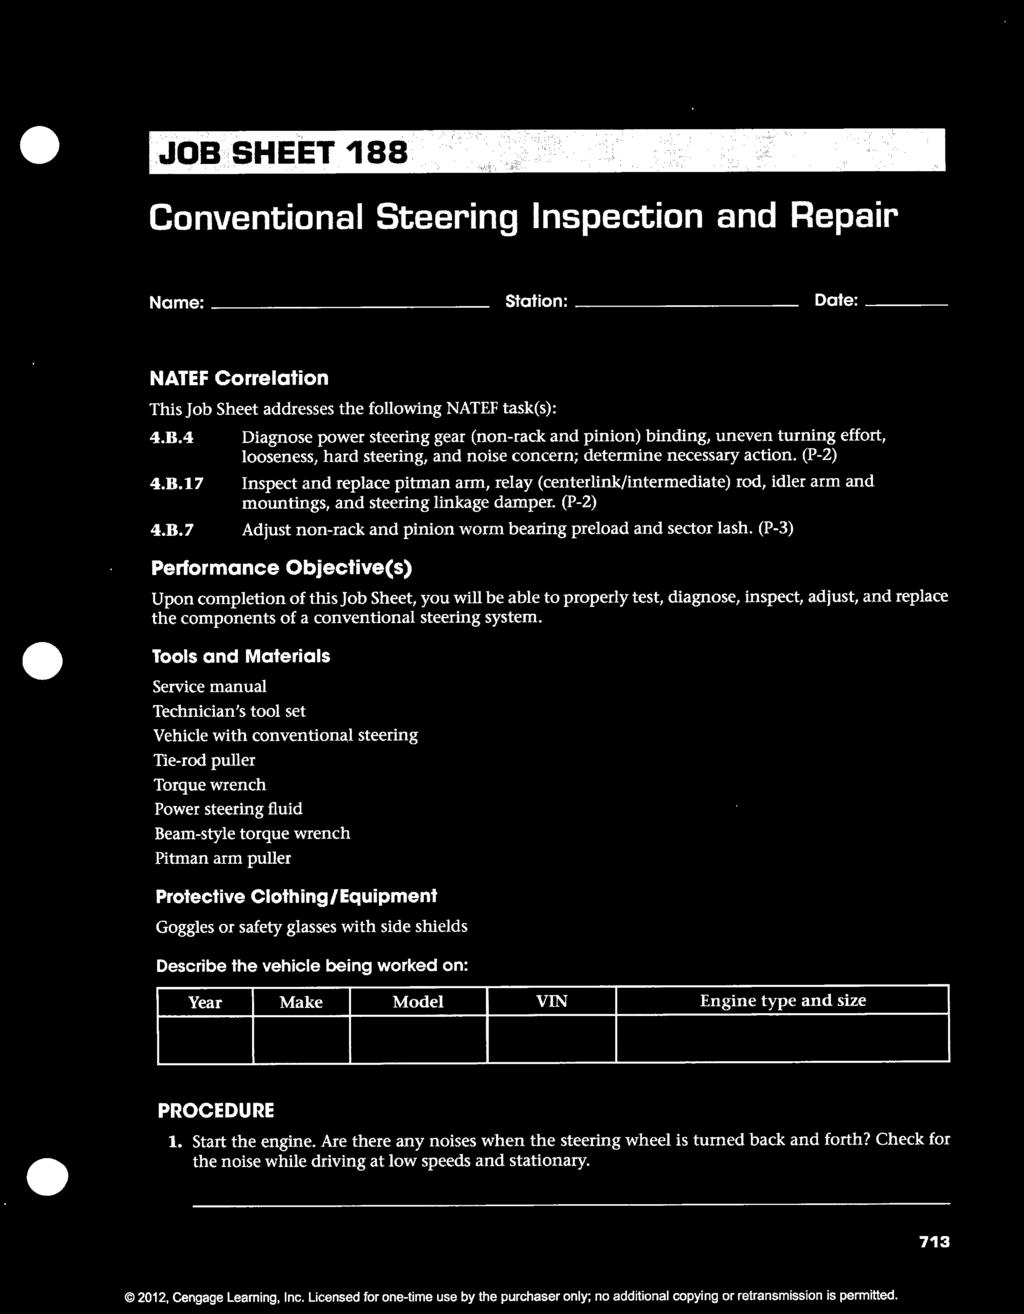 JOB SHEET 188 Conventional Steering Inspection and Repair Name: ---------------------------- Station: Date: NATEF Correlation This Job Sheet addresses the following NATEF task(s): 4.B.4 4.B.17 4.B.7 Diagnose power steering gear (non-rack and pinion) binding, uneven turning effort, looseness, hard steering, and noise concern; determine necessary action.